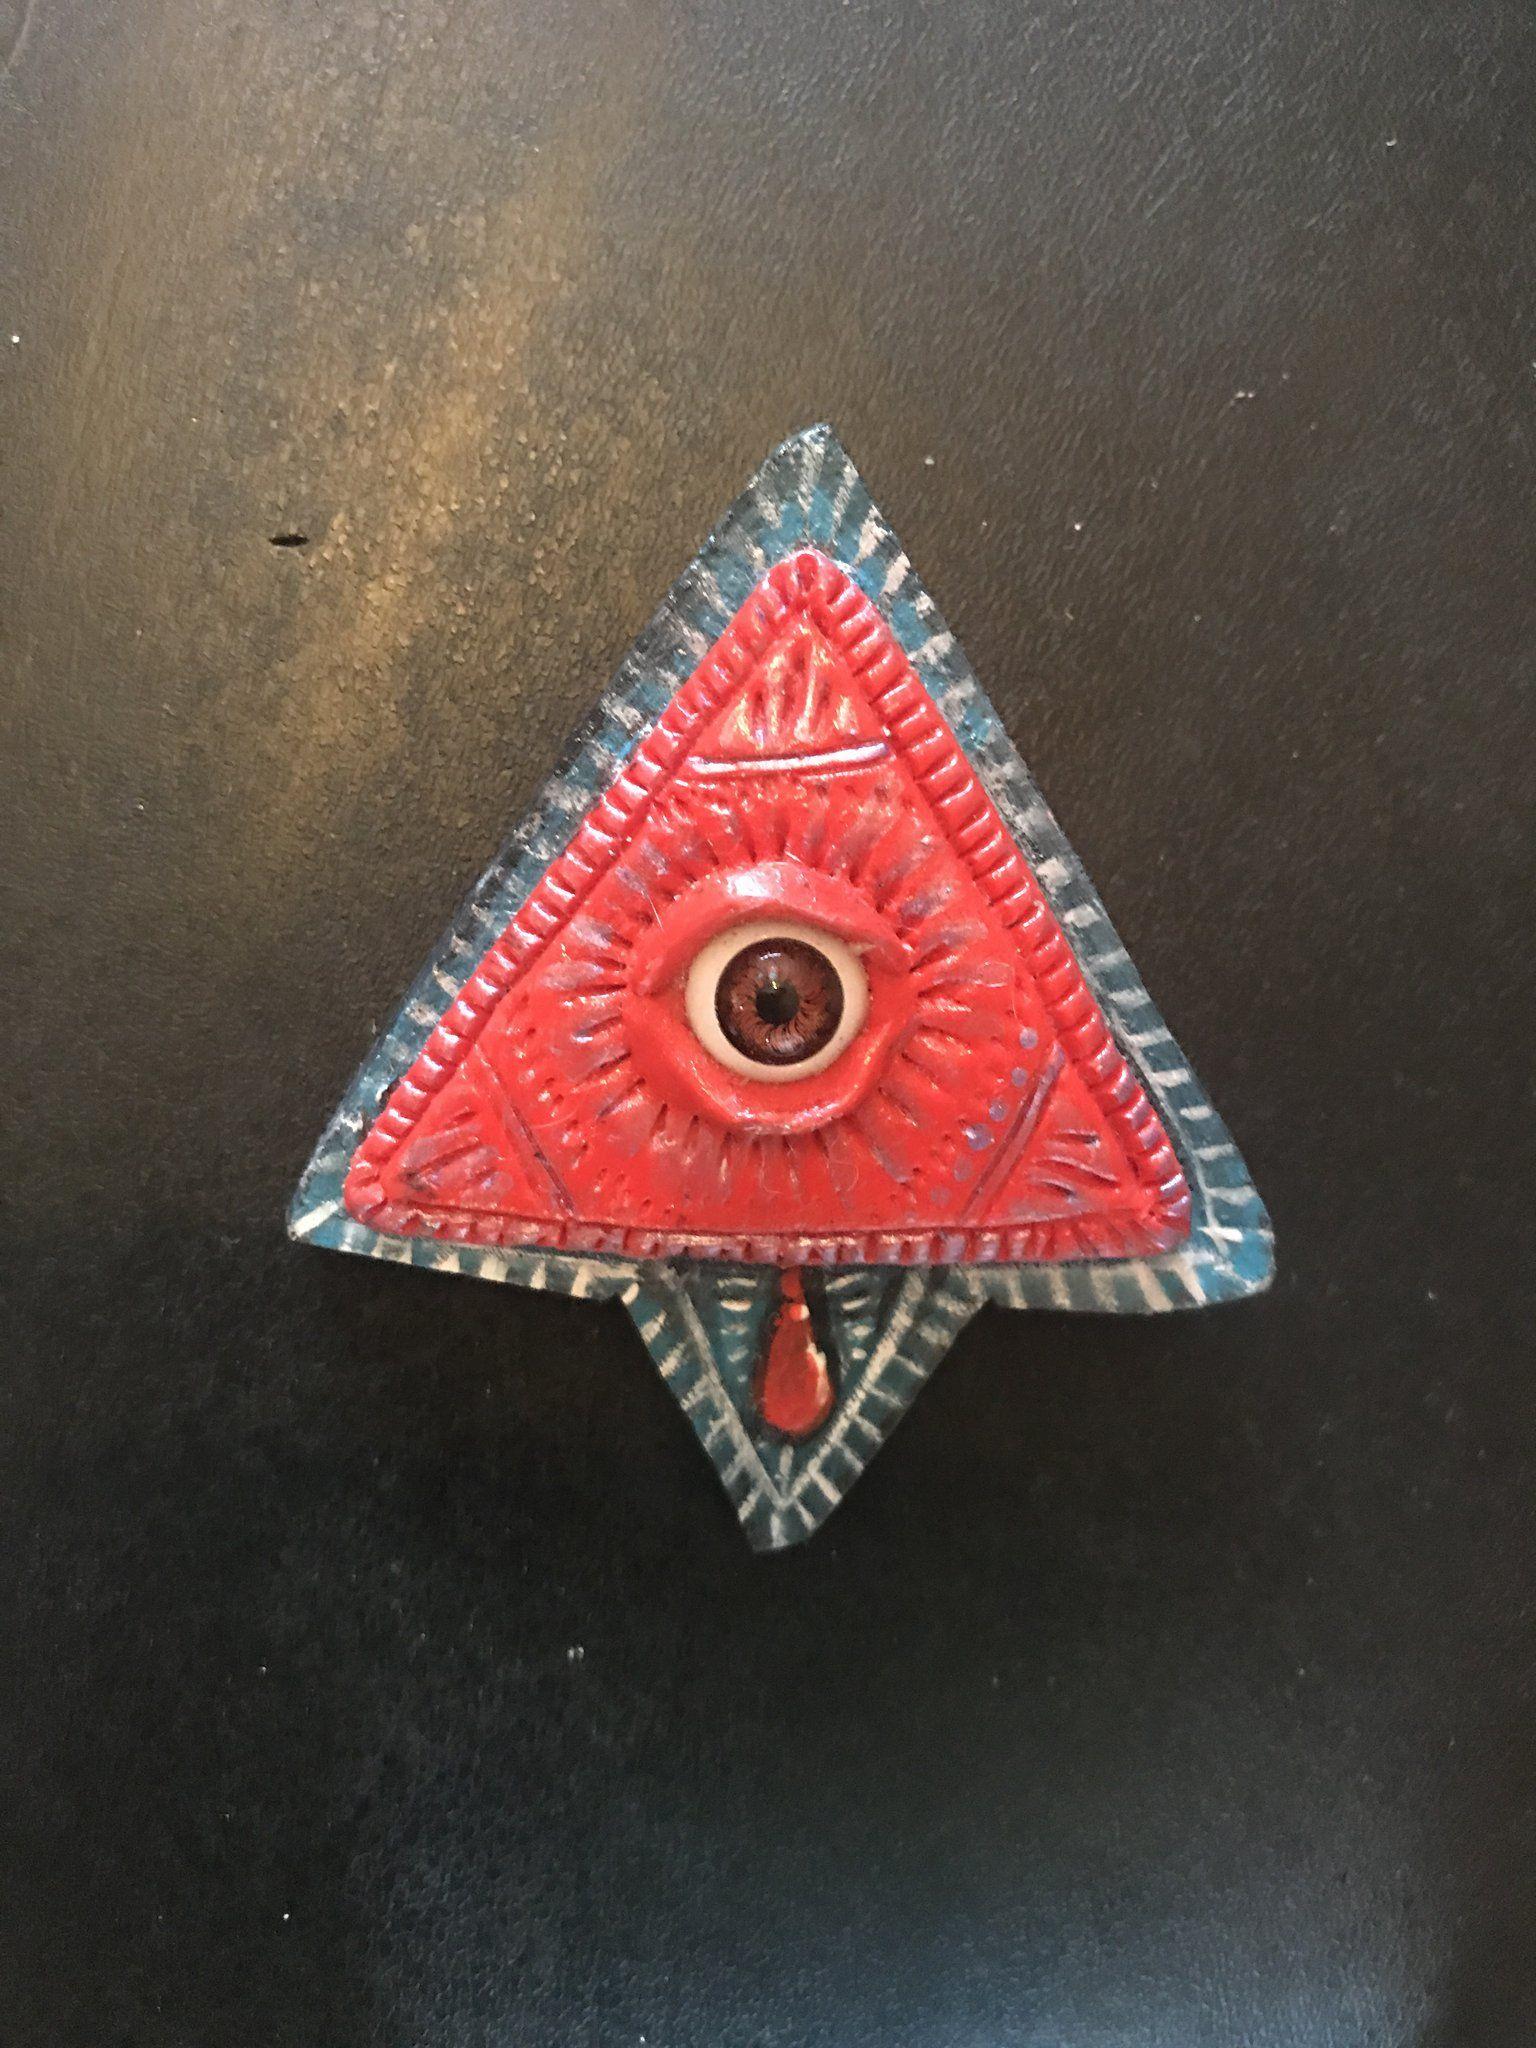 Silver with Red Triangle Logo - Red Triangle Brooch with All Seeing Eye